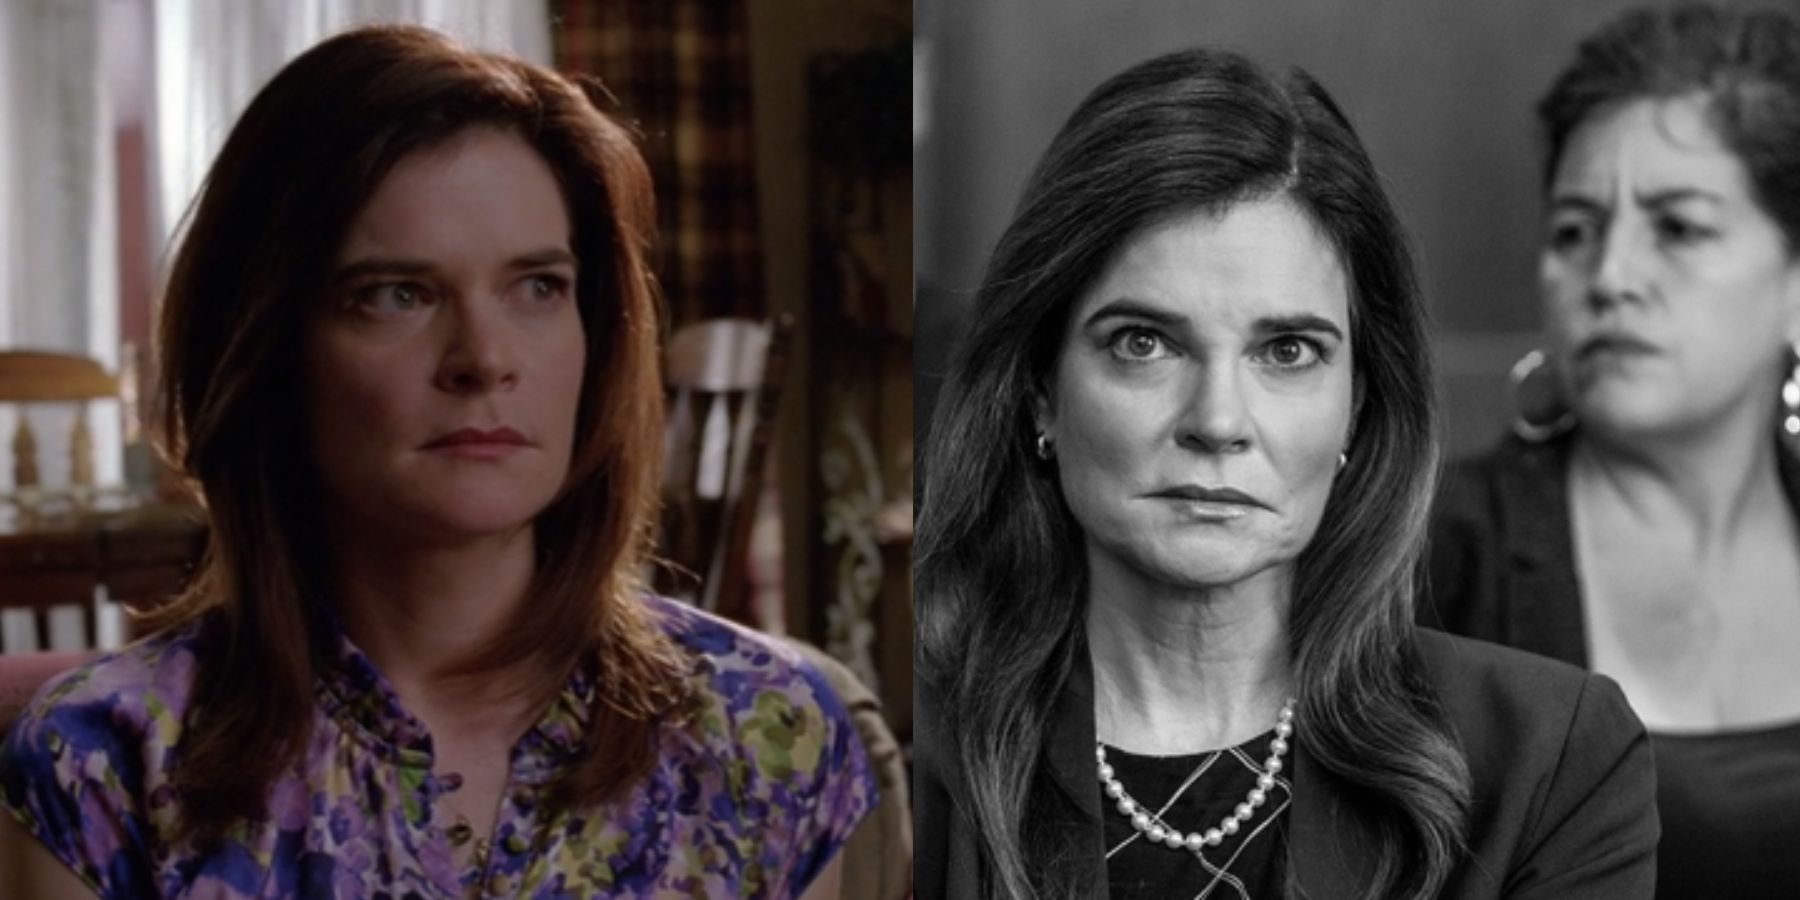 Betsy Brandt as Marie Schrader in Breaking Bad and Better Call Saul